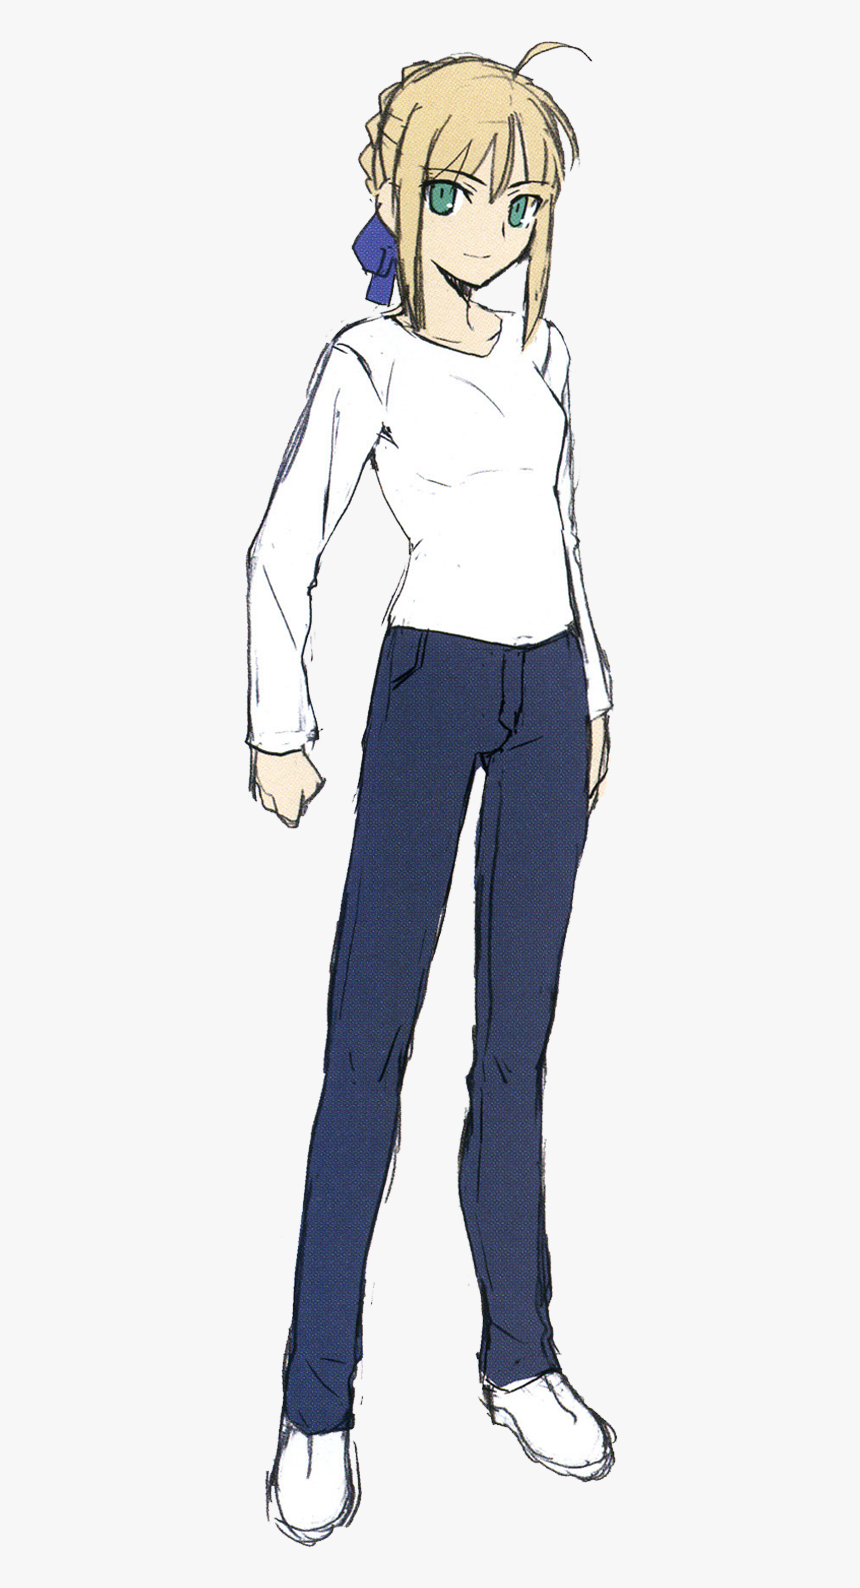 Saber New Casual - Casual Saber Fate Stay Night Png, Transparent Png, Free Download